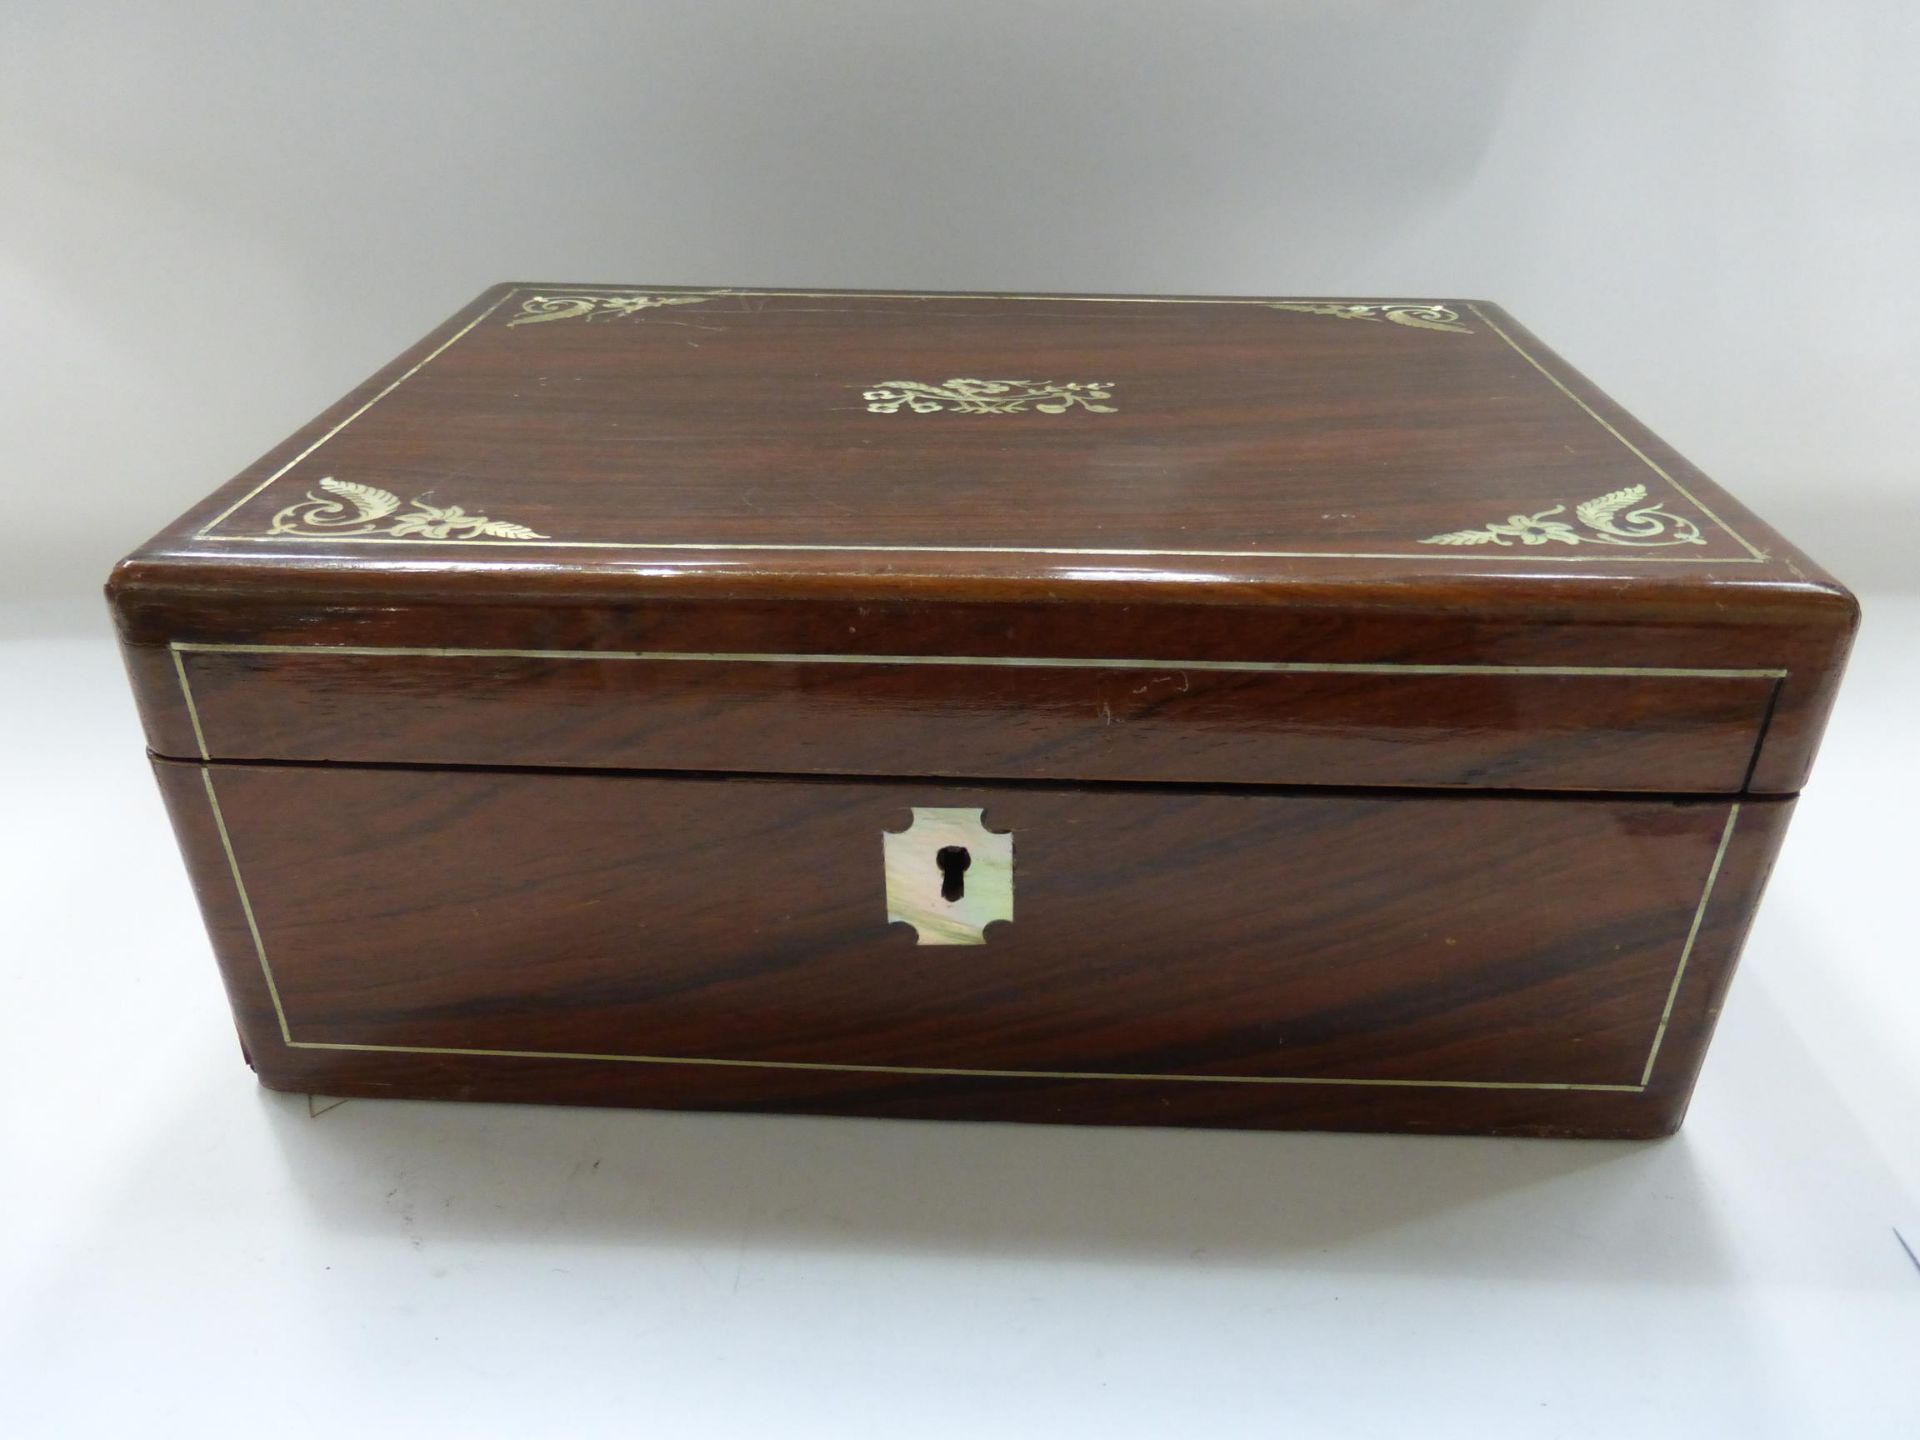 A wooden Jewellery Box containing Vintage Costume Jewellery (compact, silver brooch etc.) (Est £